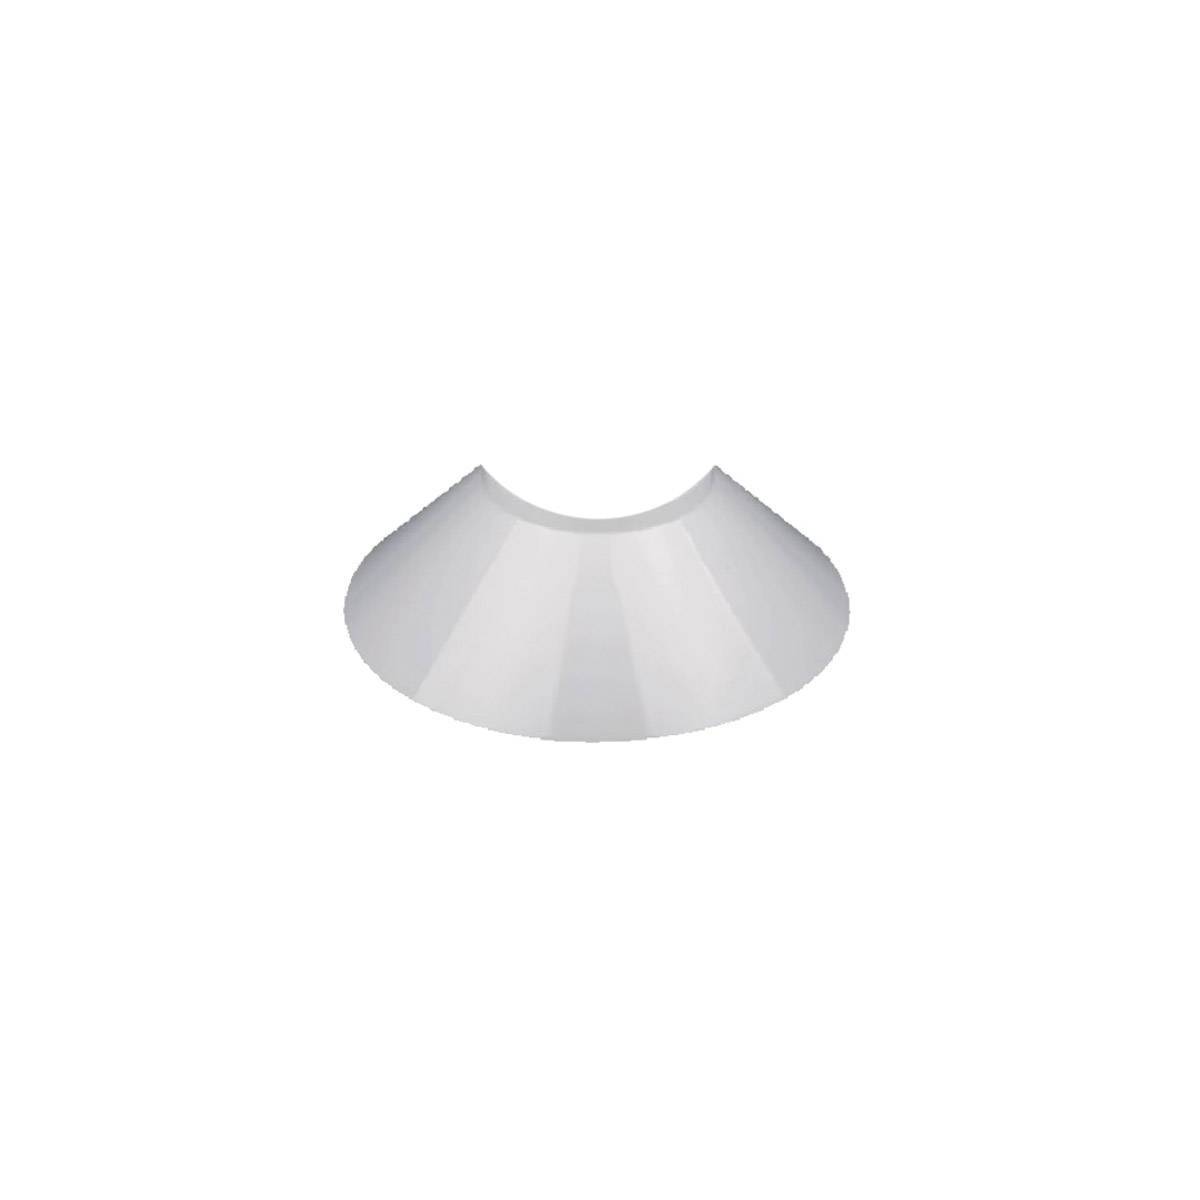 DIFFUSER FOR INDUSTRIAL LED BULB 80W ANGLE 120º.